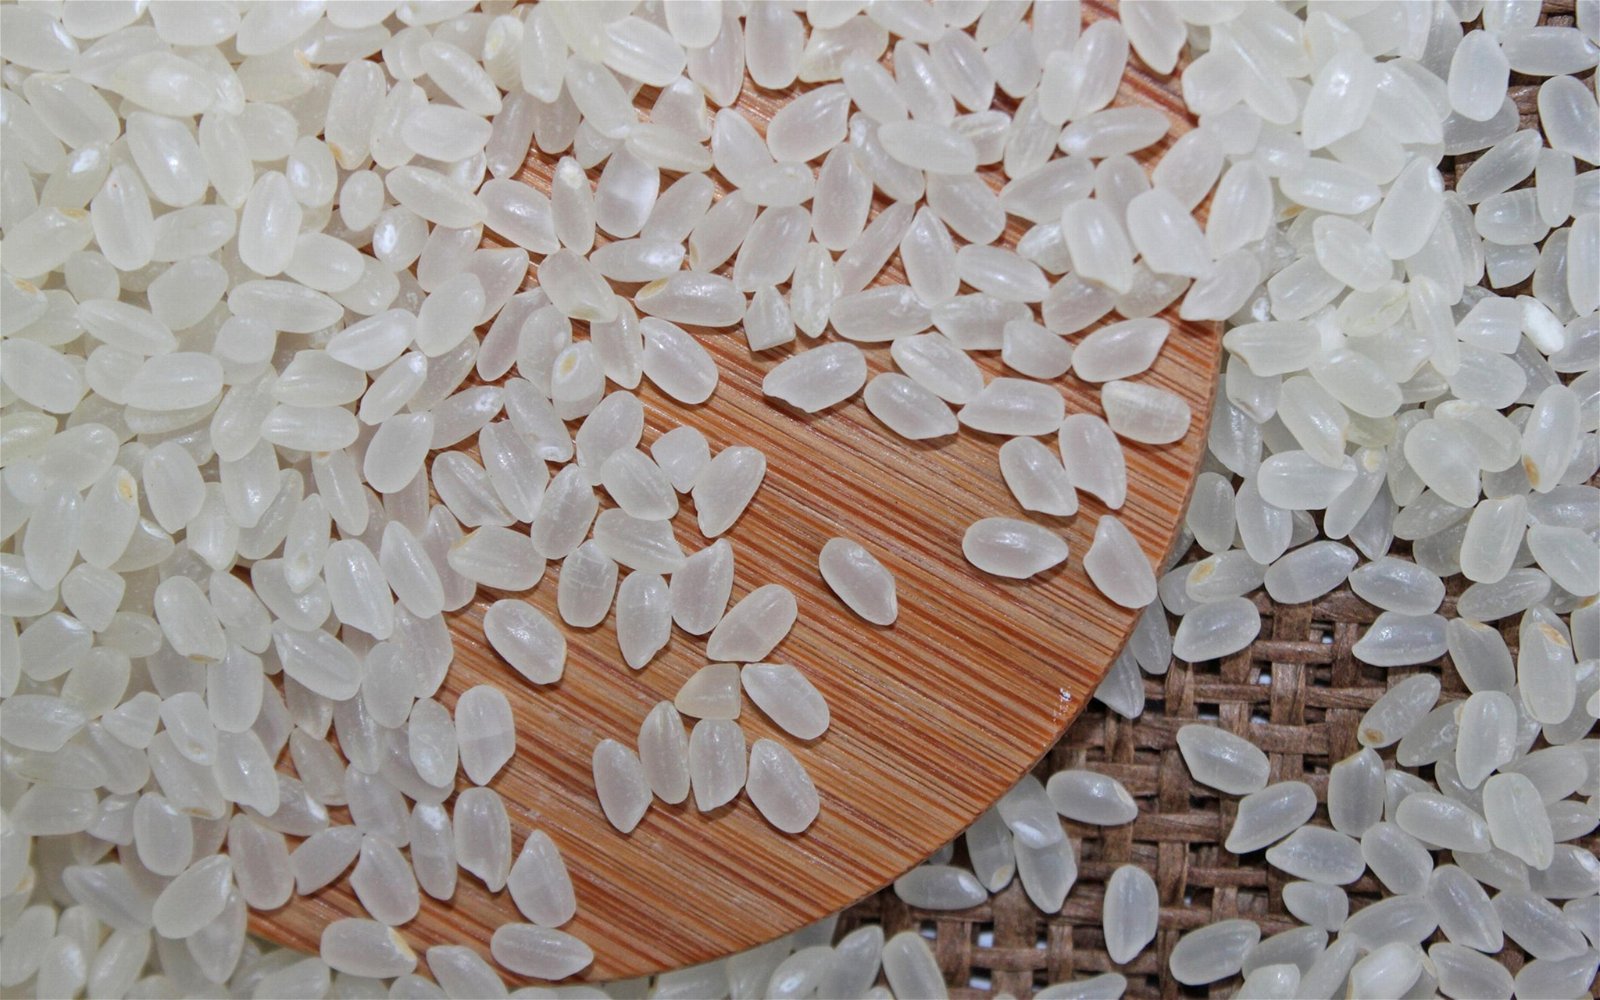 Overview about Japonica Rice - Japanese Rice in Vietnam 3